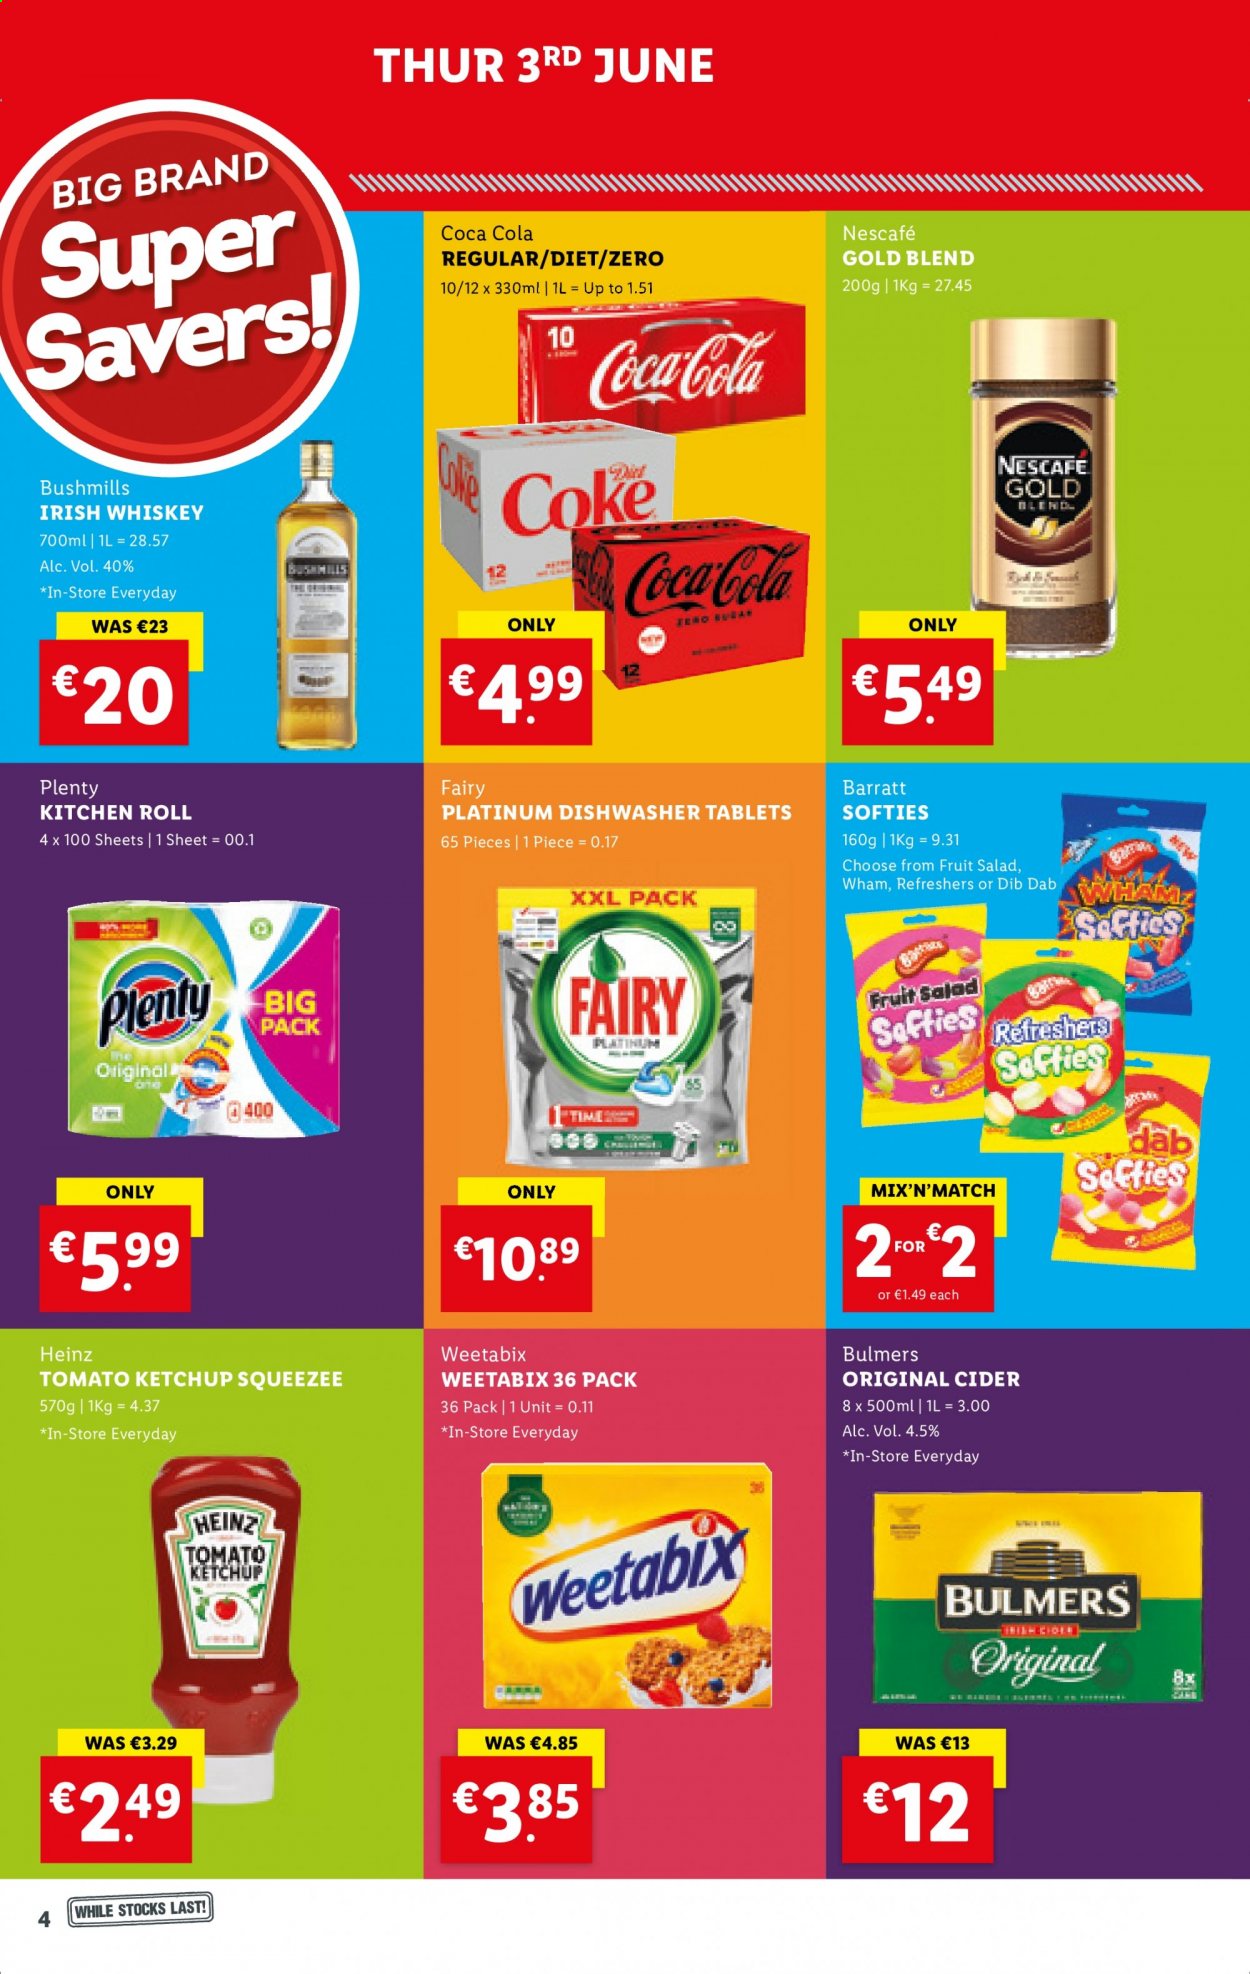 thumbnail - Lidl offer  - 03.06.2021 - 09.06.2021 - Sales products - Heinz, fruit salad, Weetabix, ketchup, Coca-Cola, Nescafé, whiskey, irish whiskey, whisky, cider, Bulmers, Plenty, Fairy, kitchen rolls. Page 4.